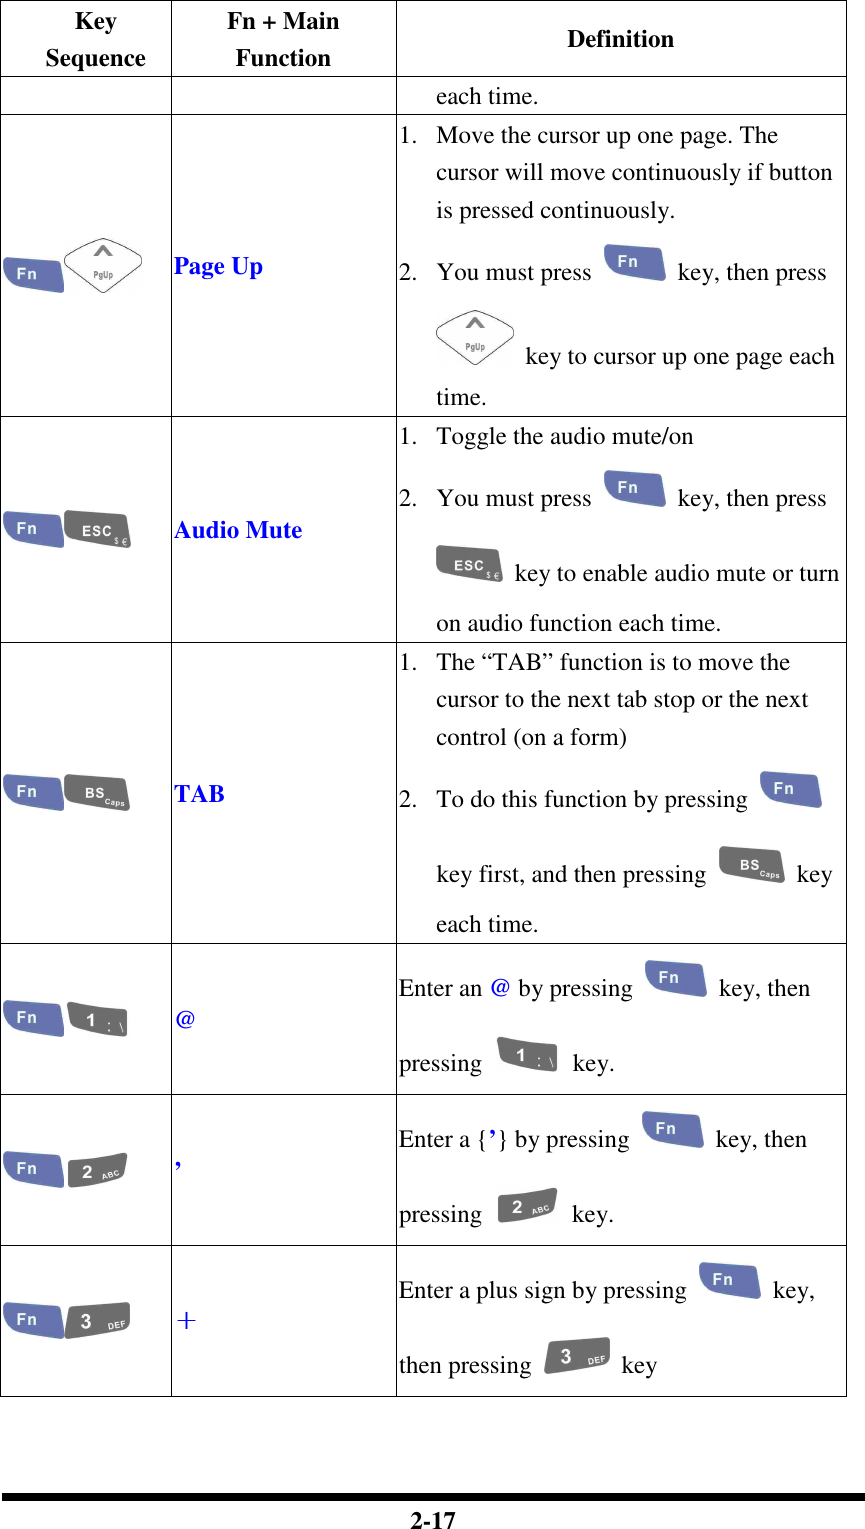  2-17 Key Sequence Fn + Main Function  Definition each time.  Page Up 1. Move the cursor up one page. The cursor will move continuously if button is pressed continuously. 2. You must press    key, then press   key to cursor up one page each time.  Audio Mute 1. Toggle the audio mute/on 2. You must press    key, then press   key to enable audio mute or turn on audio function each time.  TAB 1. The “TAB” function is to move the cursor to the next tab stop or the next control (on a form) 2. To do this function by pressing   key first, and then pressing    key each time.  @ Enter an @ by pressing    key, then pressing    key.  ’ Enter a {’} by pressing    key, then pressing    key.  ＋＋＋＋ Enter a plus sign by pressing    key, then pressing    key 